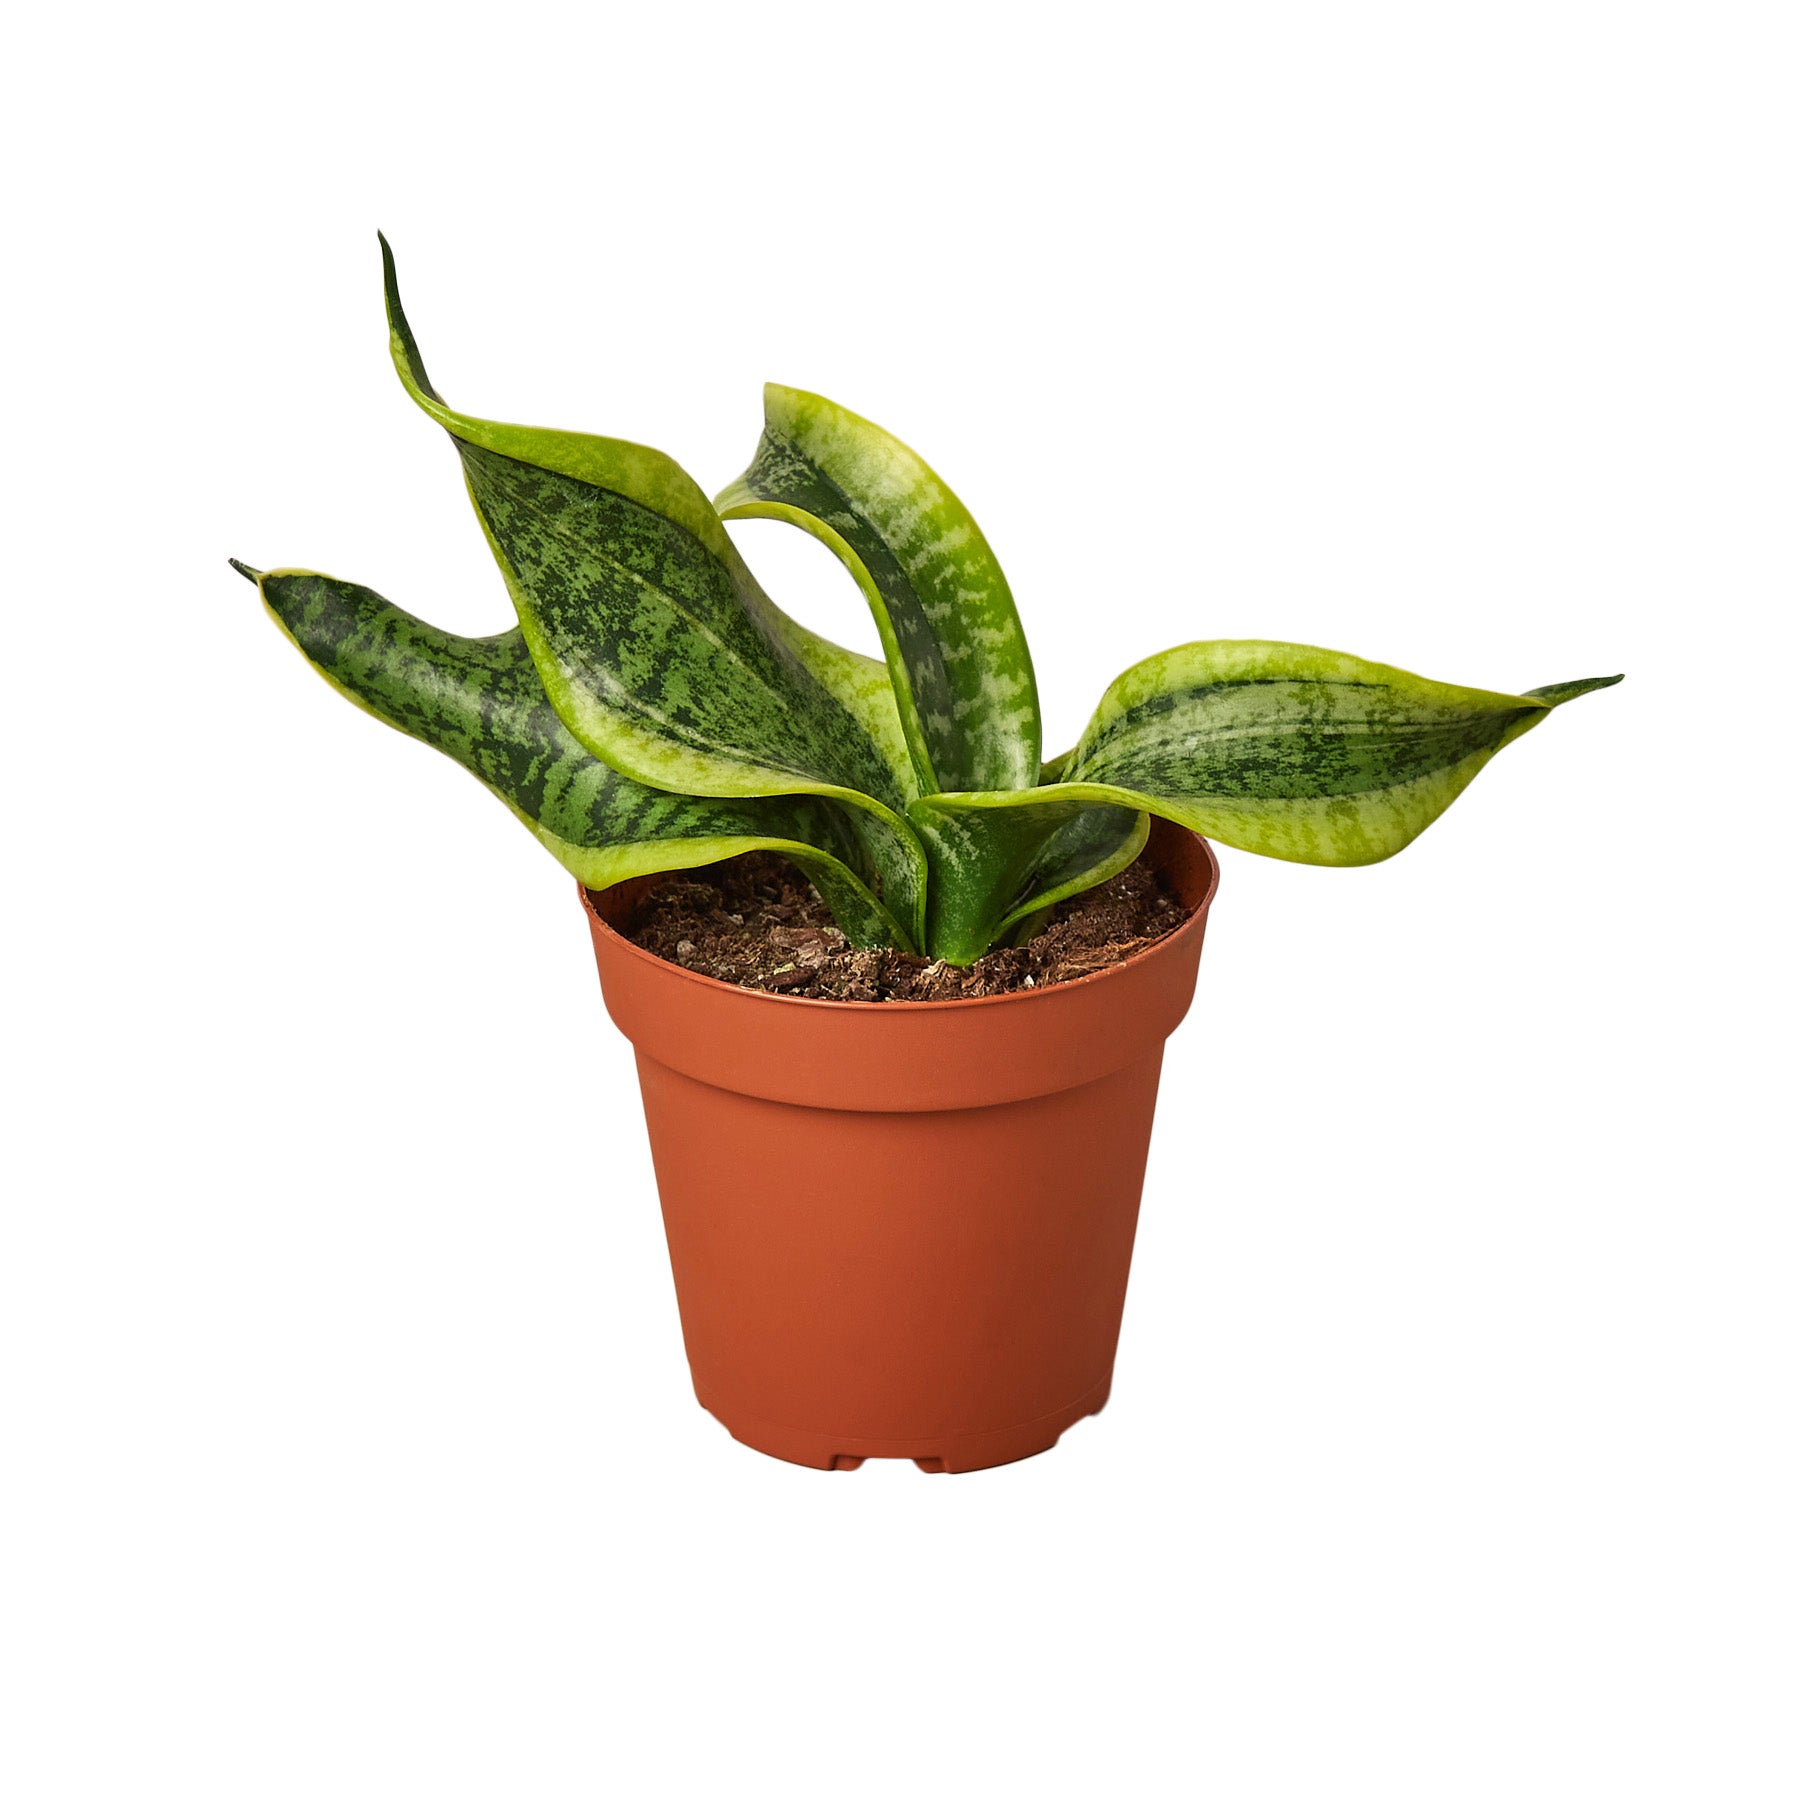 A snake plant in a pot on a white background at the best nursery near me.